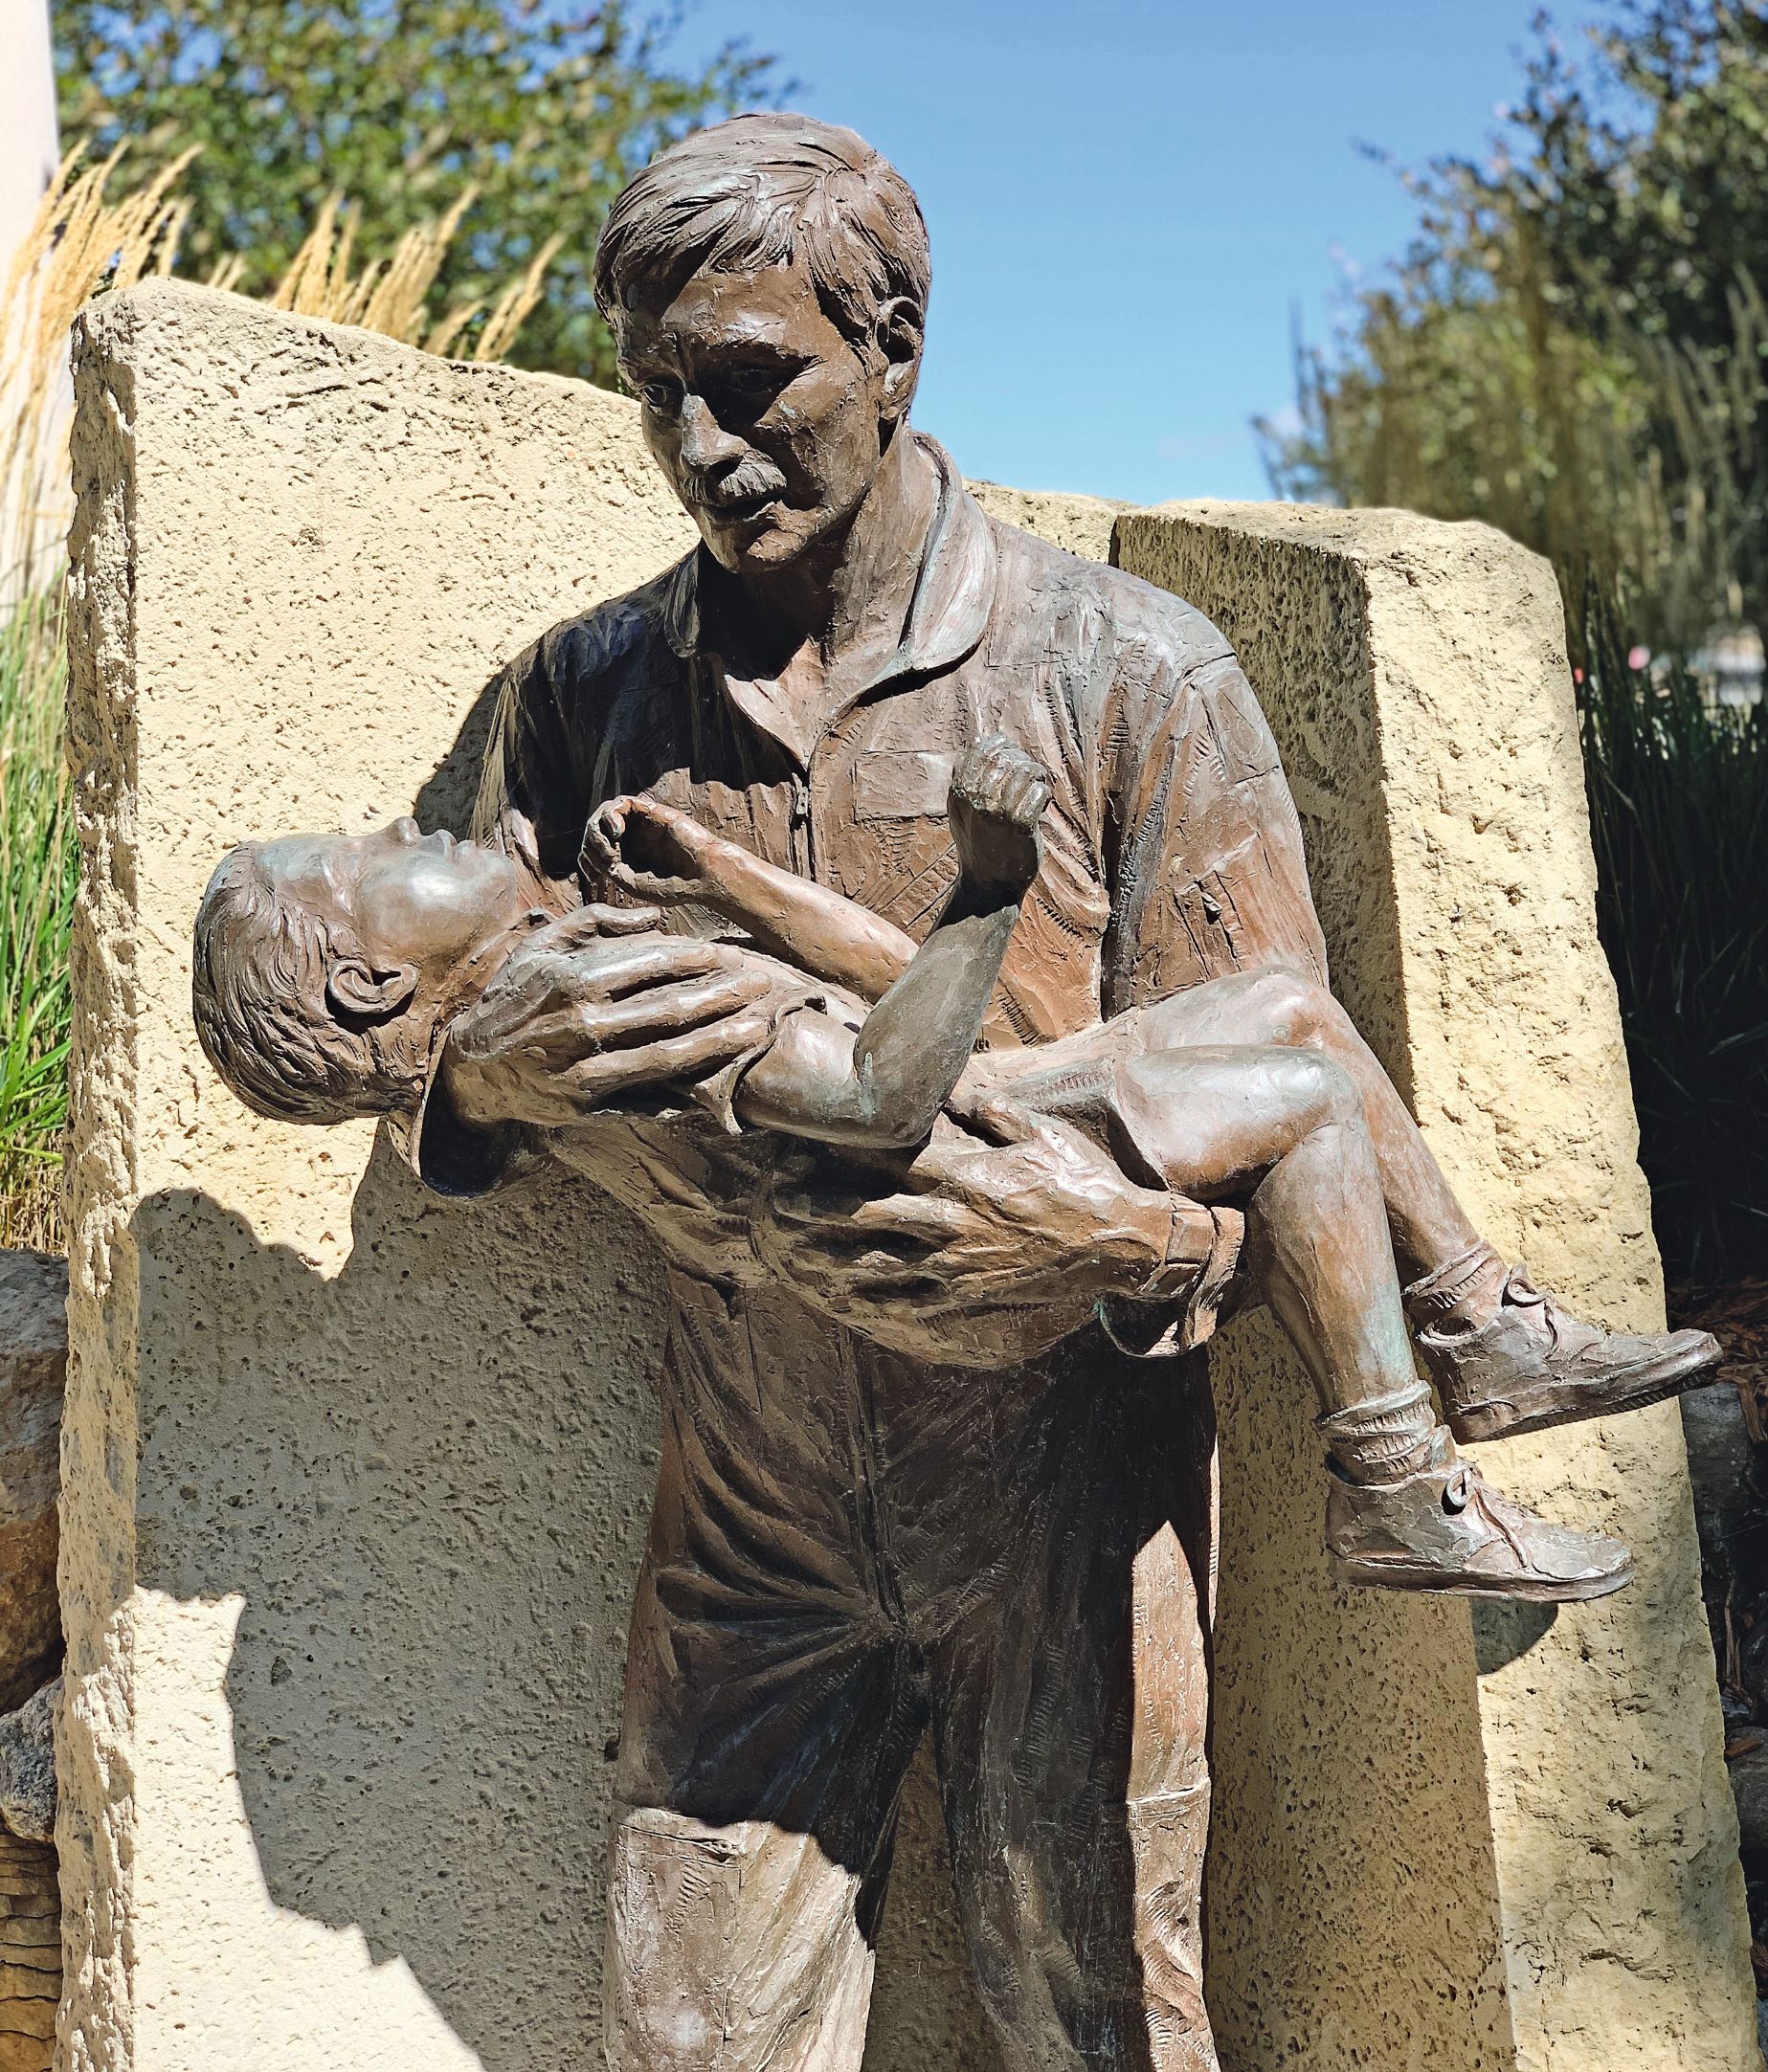 A bronze statue by Dale Lamphere based on Anderson’s photo, the centerpiece of The Spirit of Siouxland Flight 232 Memorial, Sioux City, Iowa, USA. Photo by Spencer Bailey